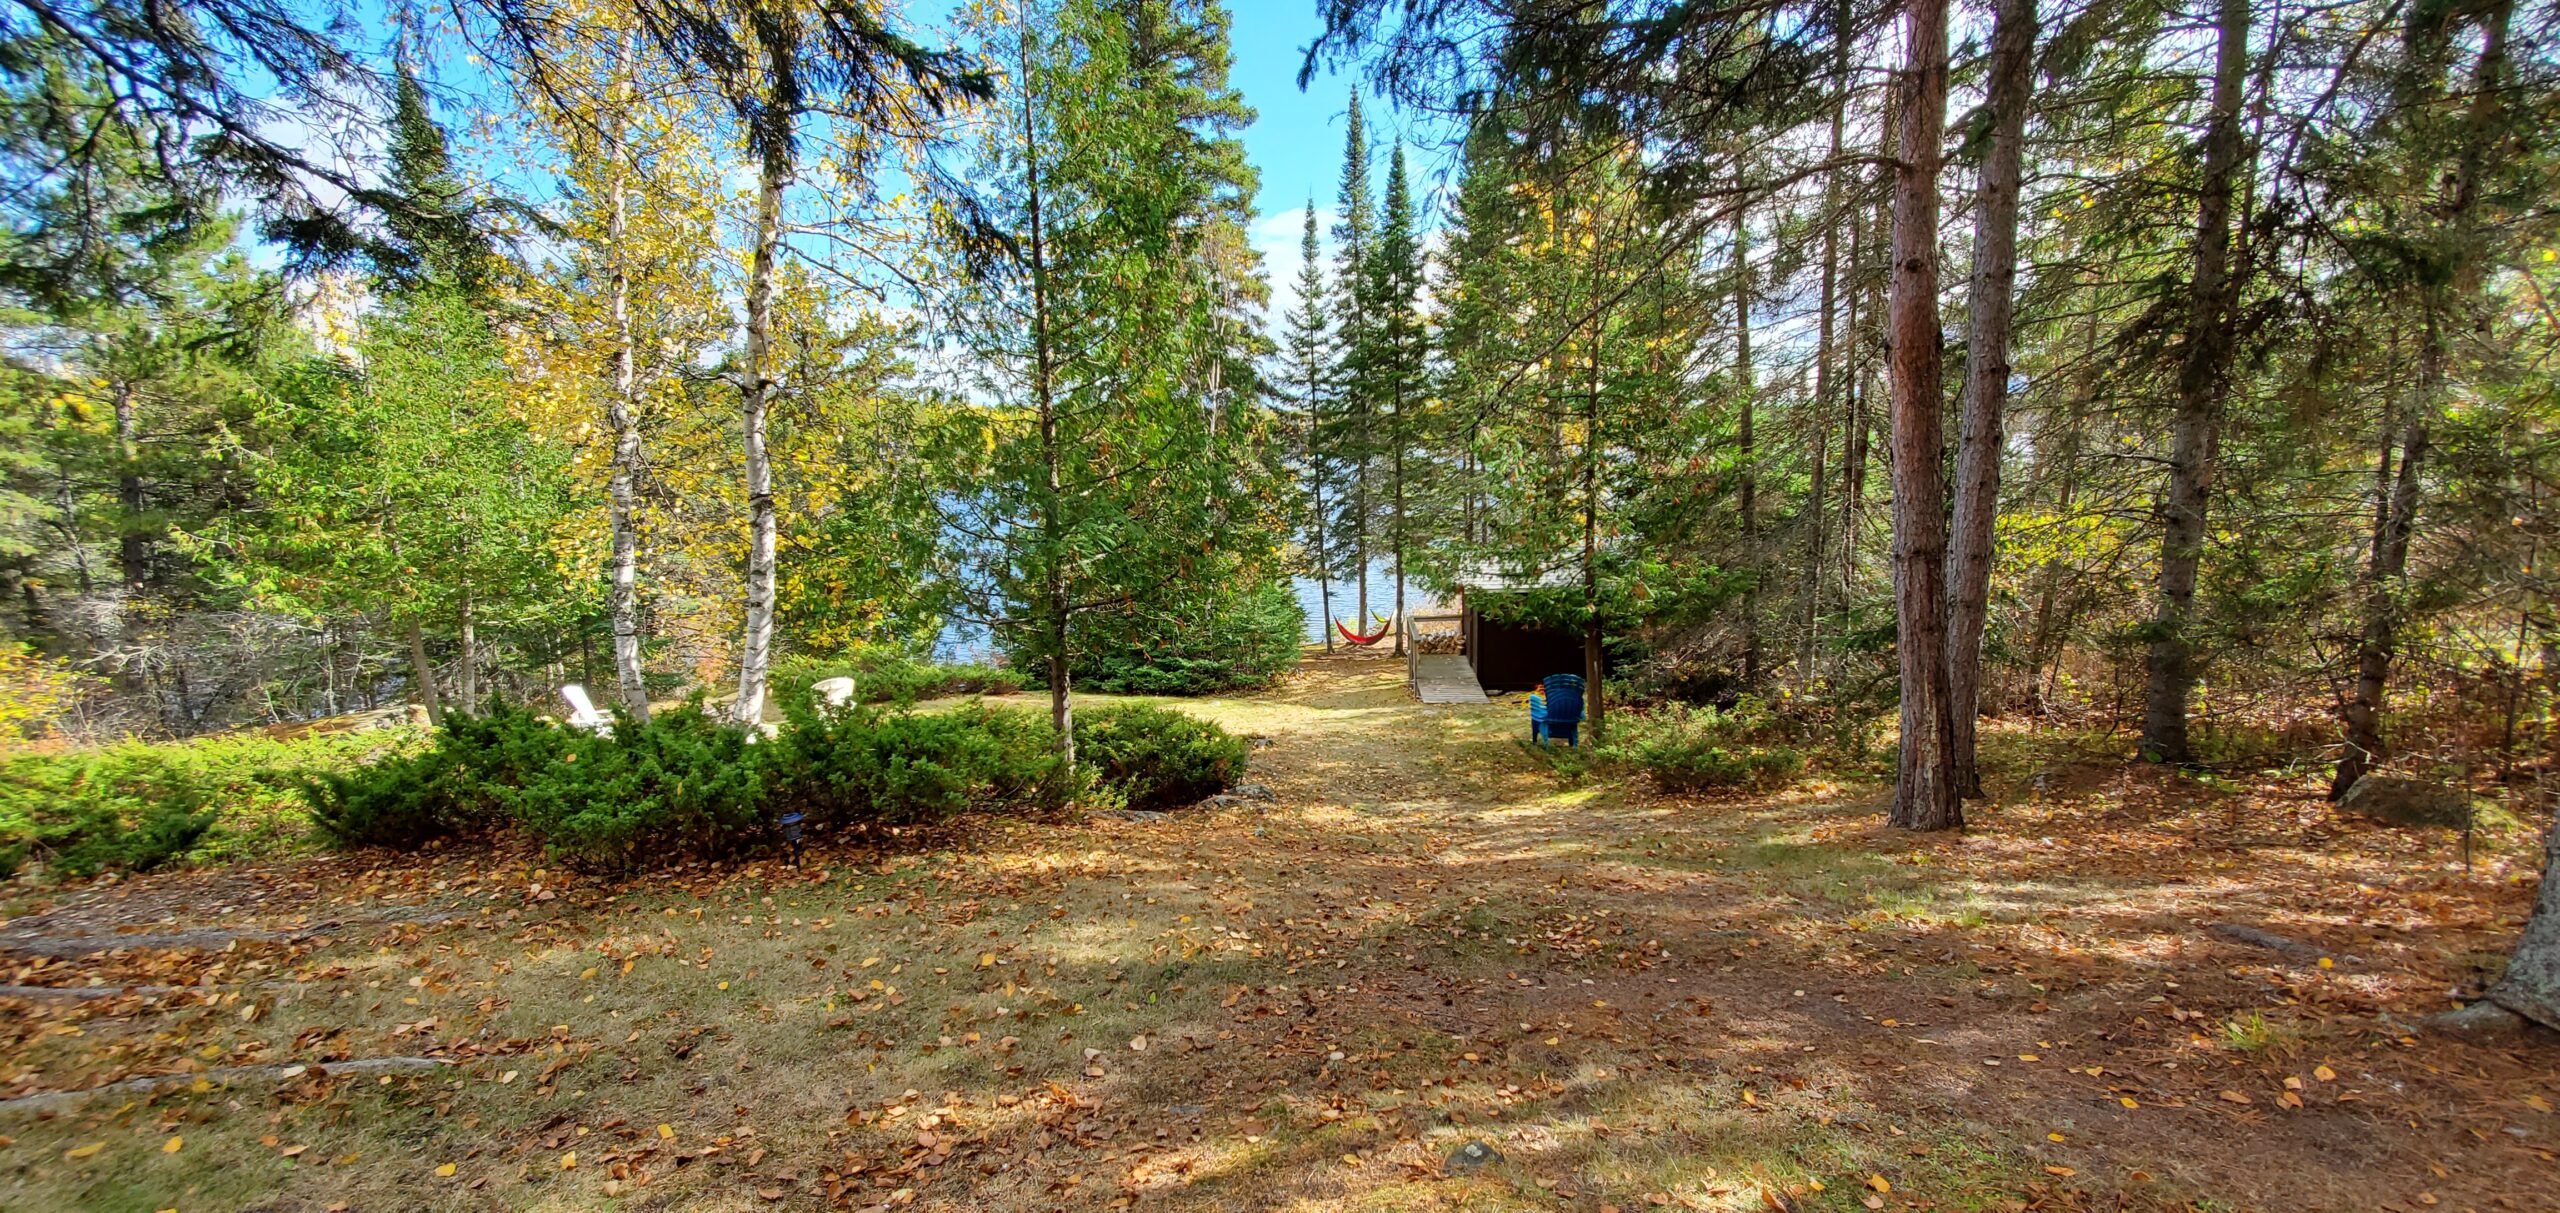 A sloping outdoor space with lots of trees, a hammock, and a fire pit. Blue lake peeks between the trees.